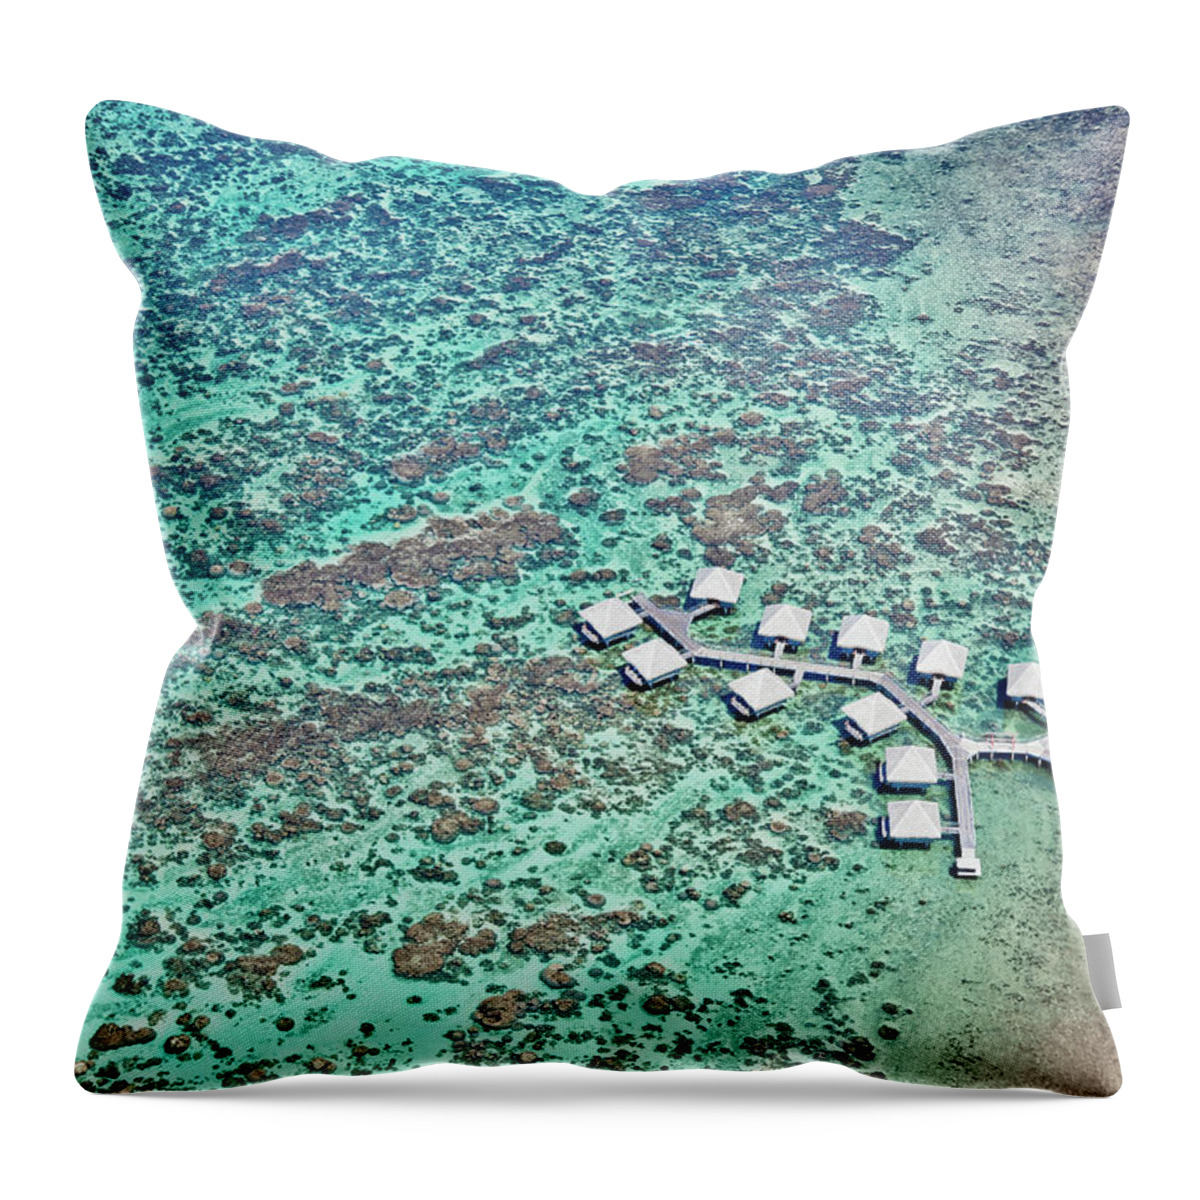 Built Structure Throw Pillow featuring the photograph Luxury Hotel In Tahiti Lagoon by Laura Benvenuti Photography